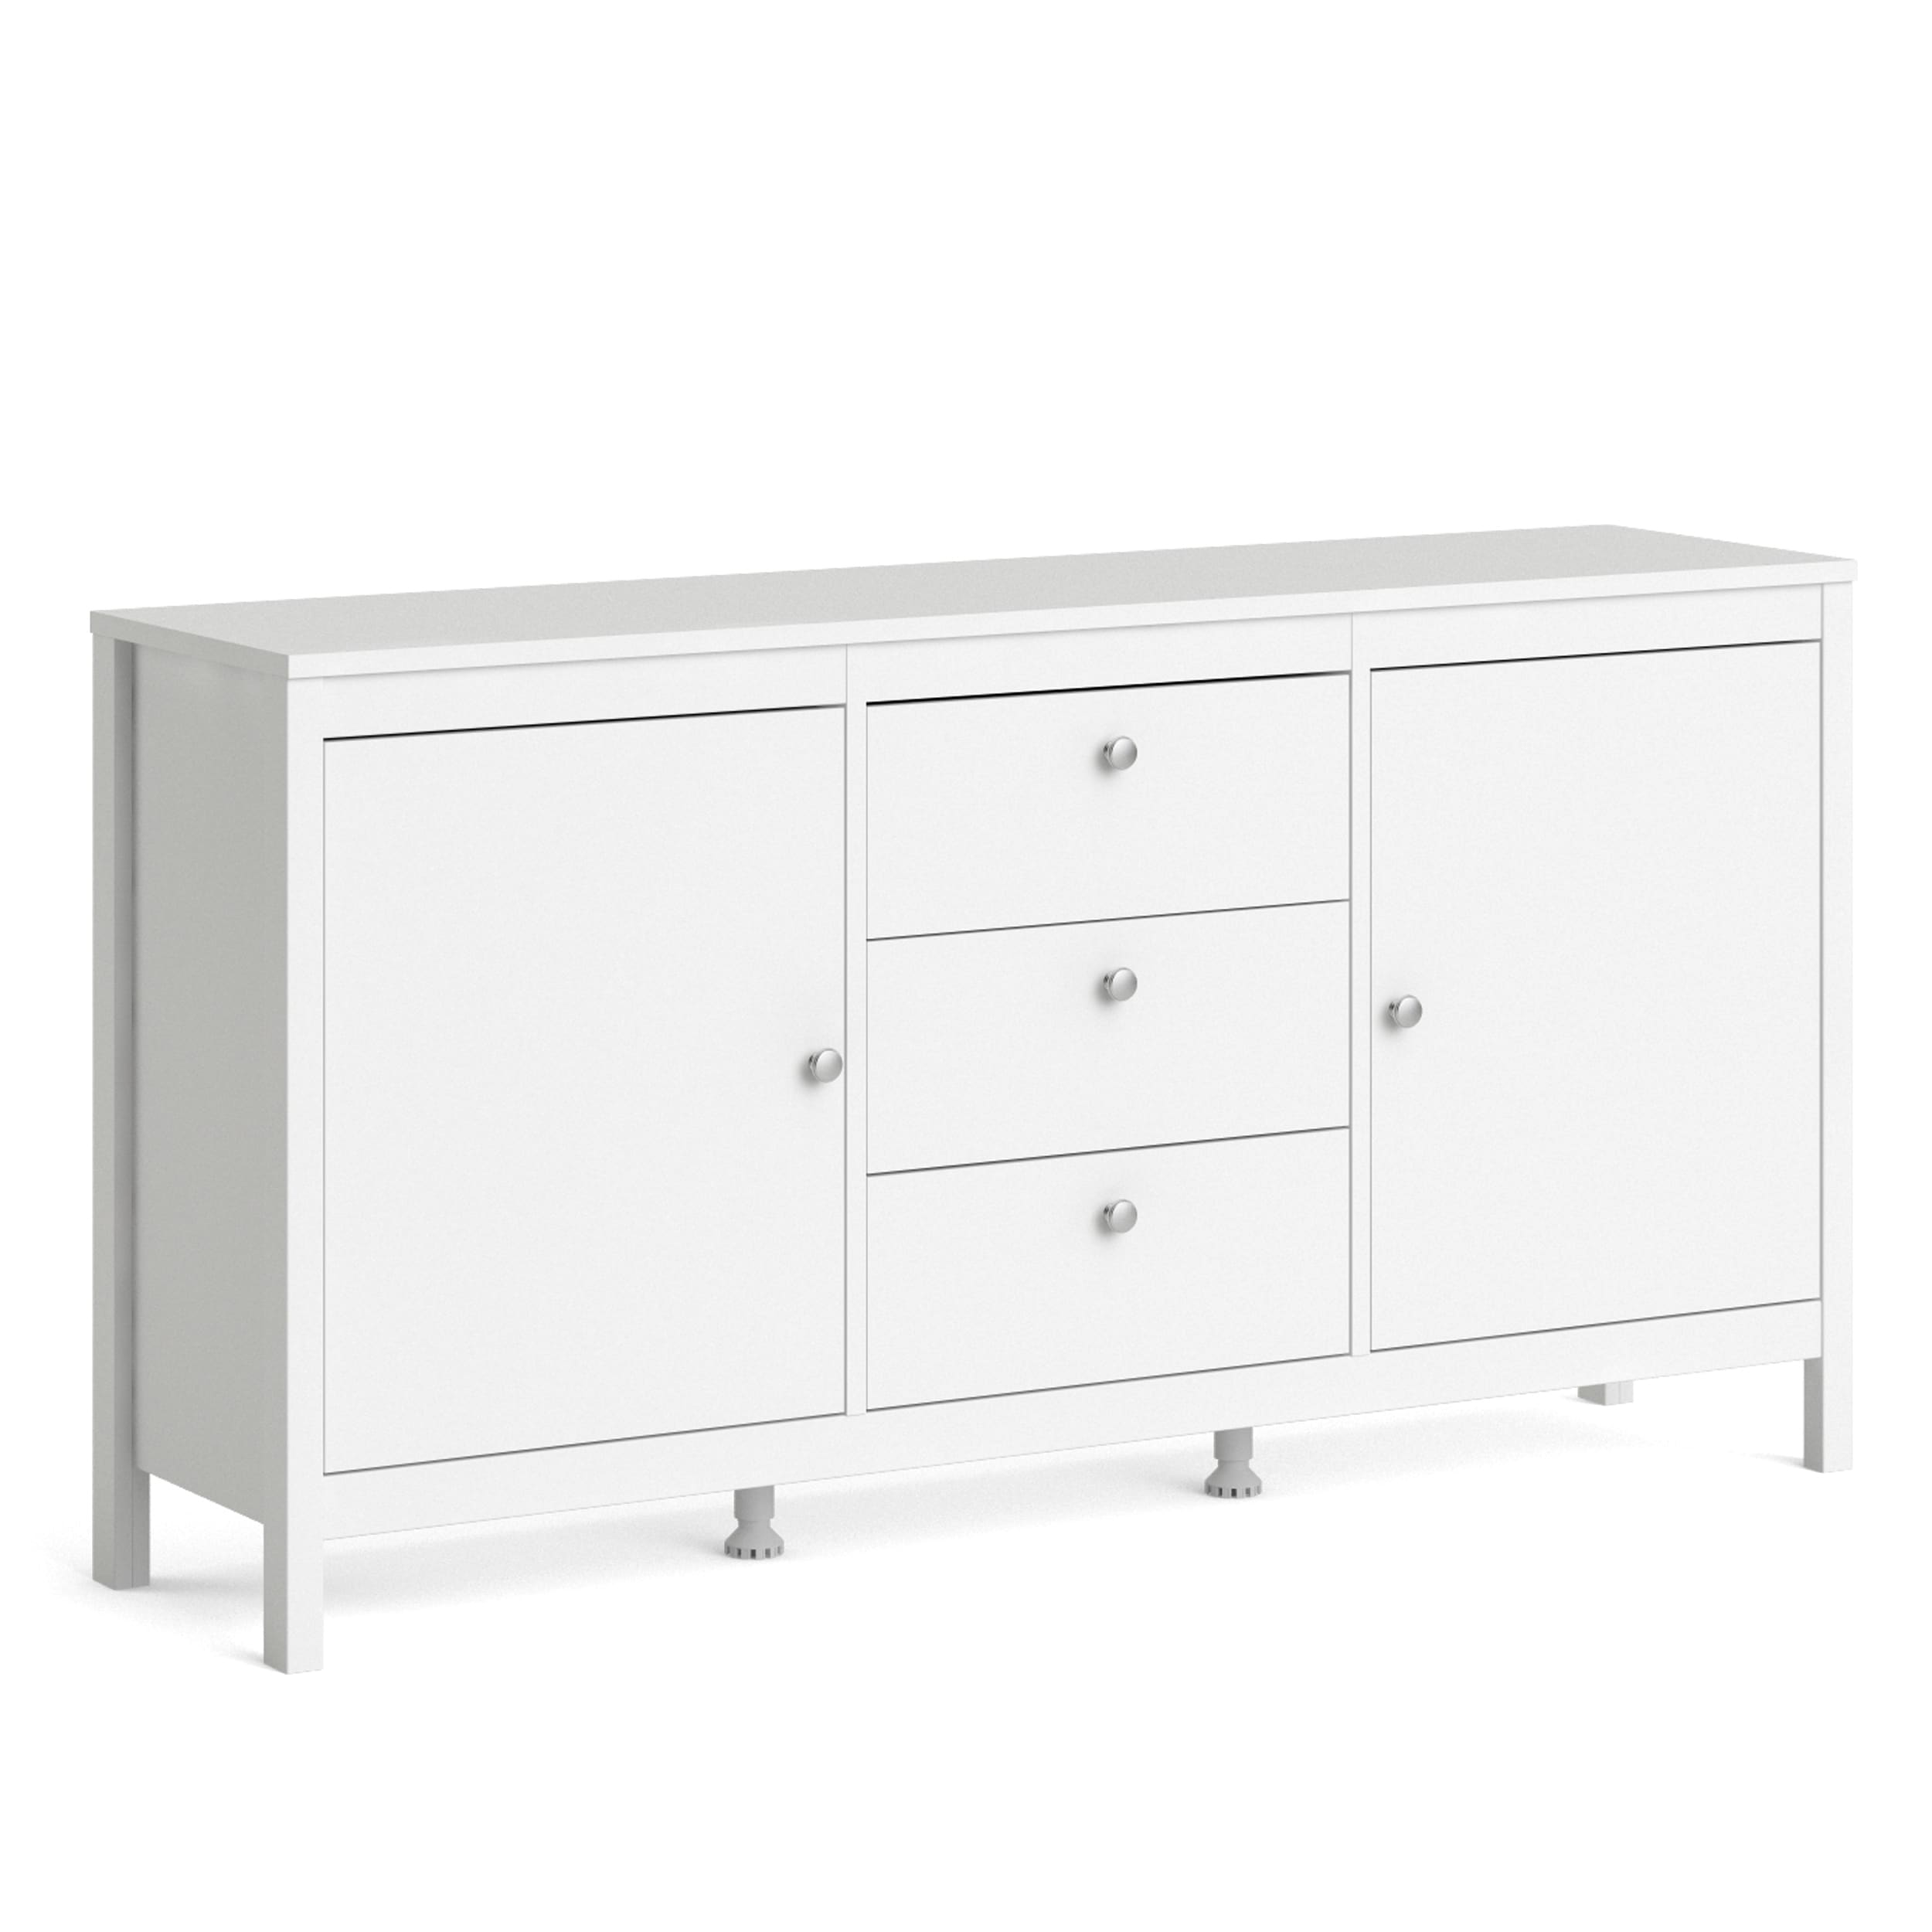 Sideboard - Sale On 2-Door Beyond & Den Madrid Porch 33673465 Bath Bed & - - with 3-Drawers